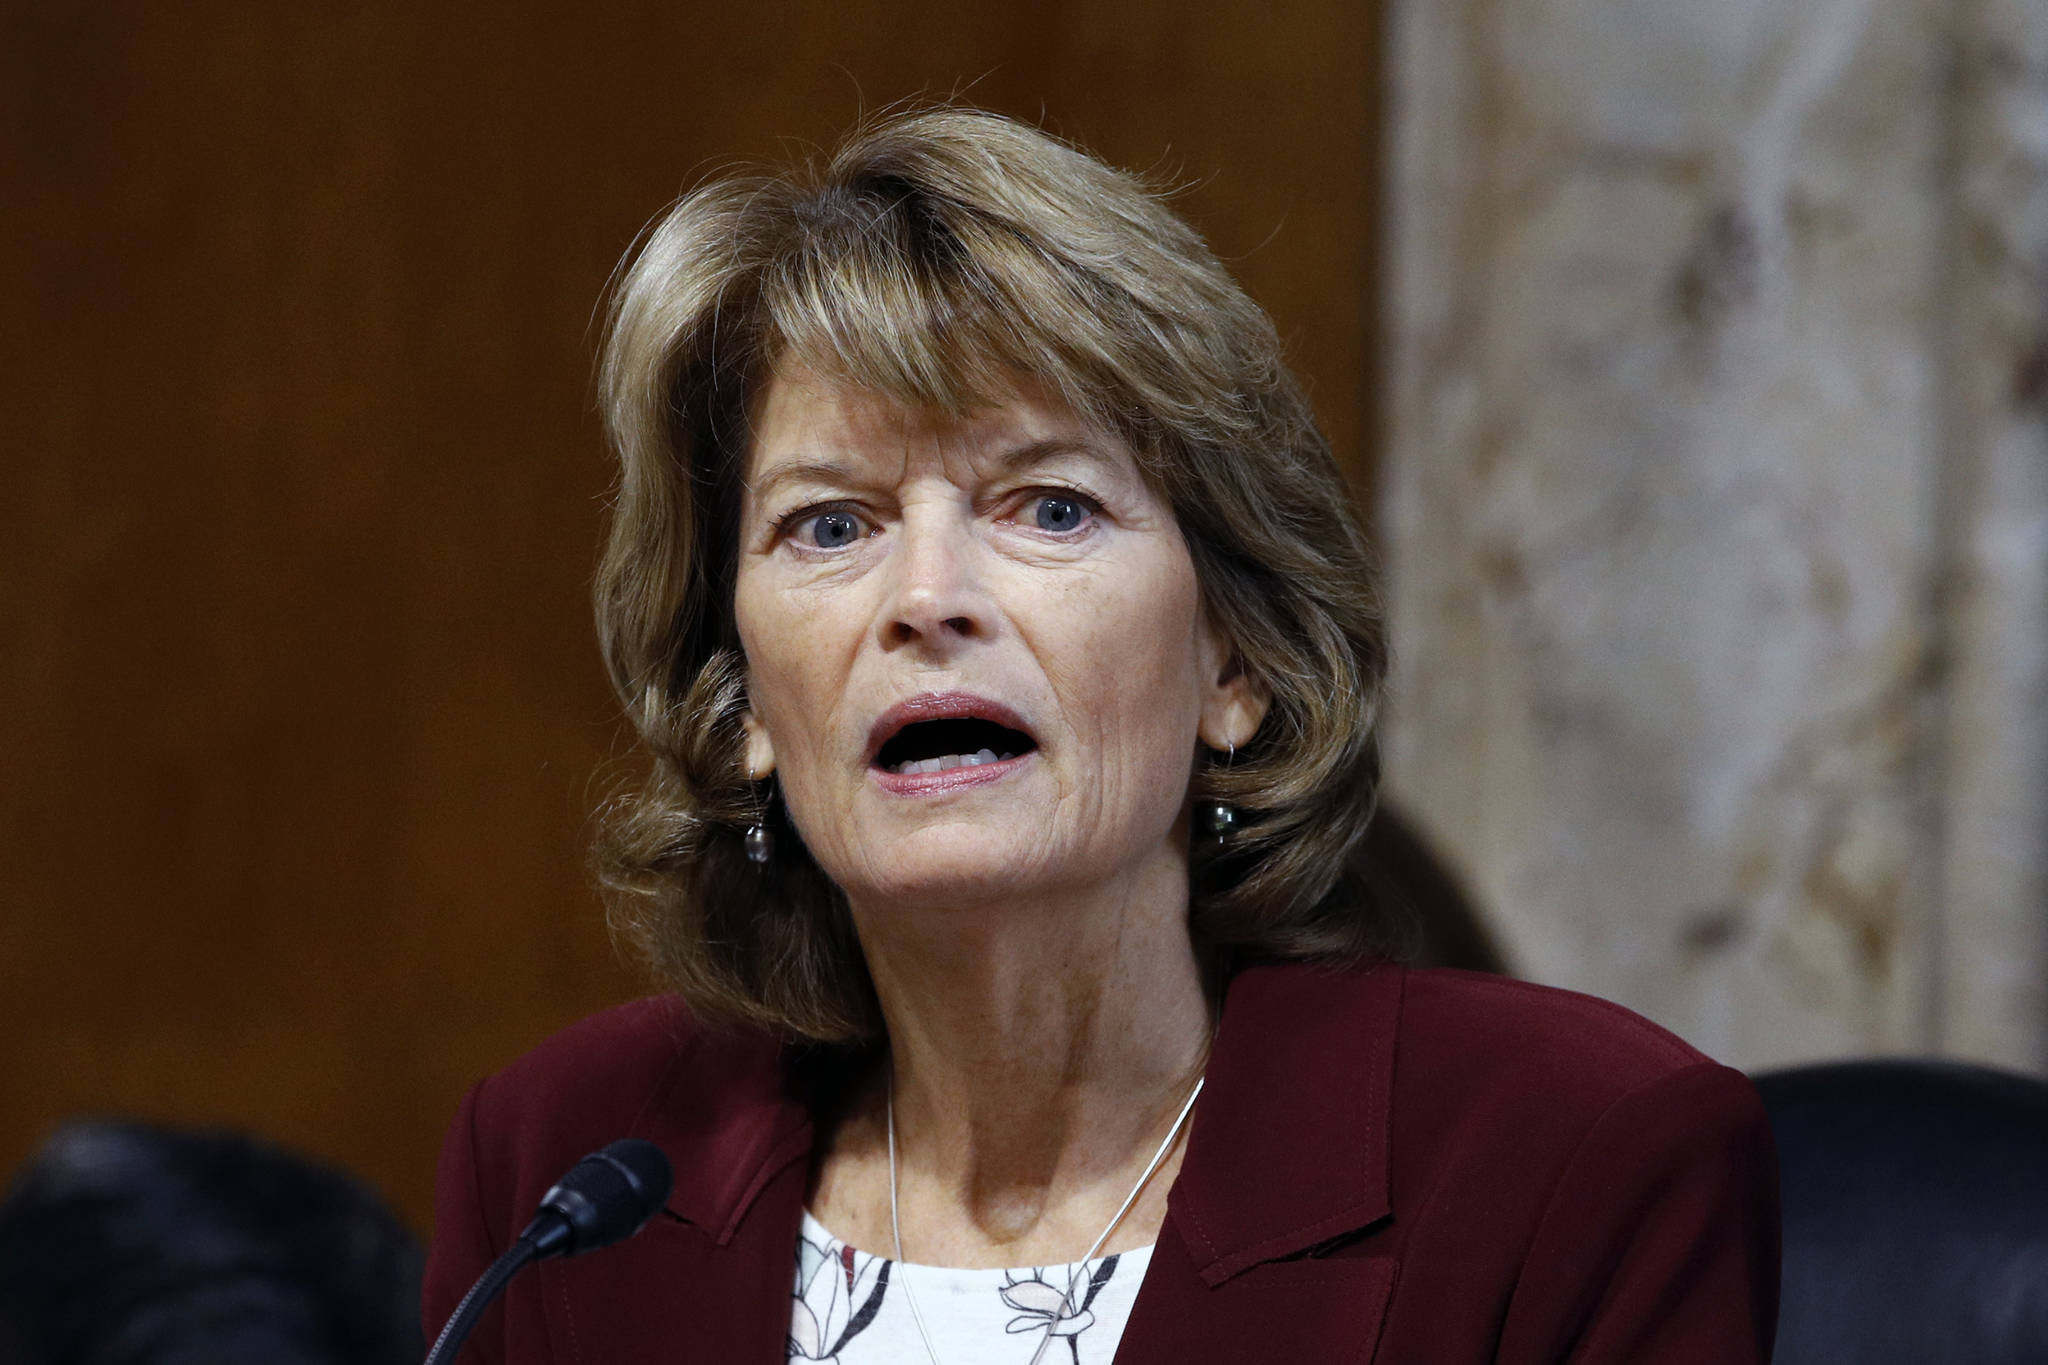 In this Dec. 19, 2019 file photo, Sen. Lisa Murkowski, R-Alaska, chair of the Senate Energy and Natural Resources Committee, speaks during a hearing on the impact of wildfires on electric grid reliability on Capitol Hill in Washington. (AP Photo/Patrick Semansky, File)